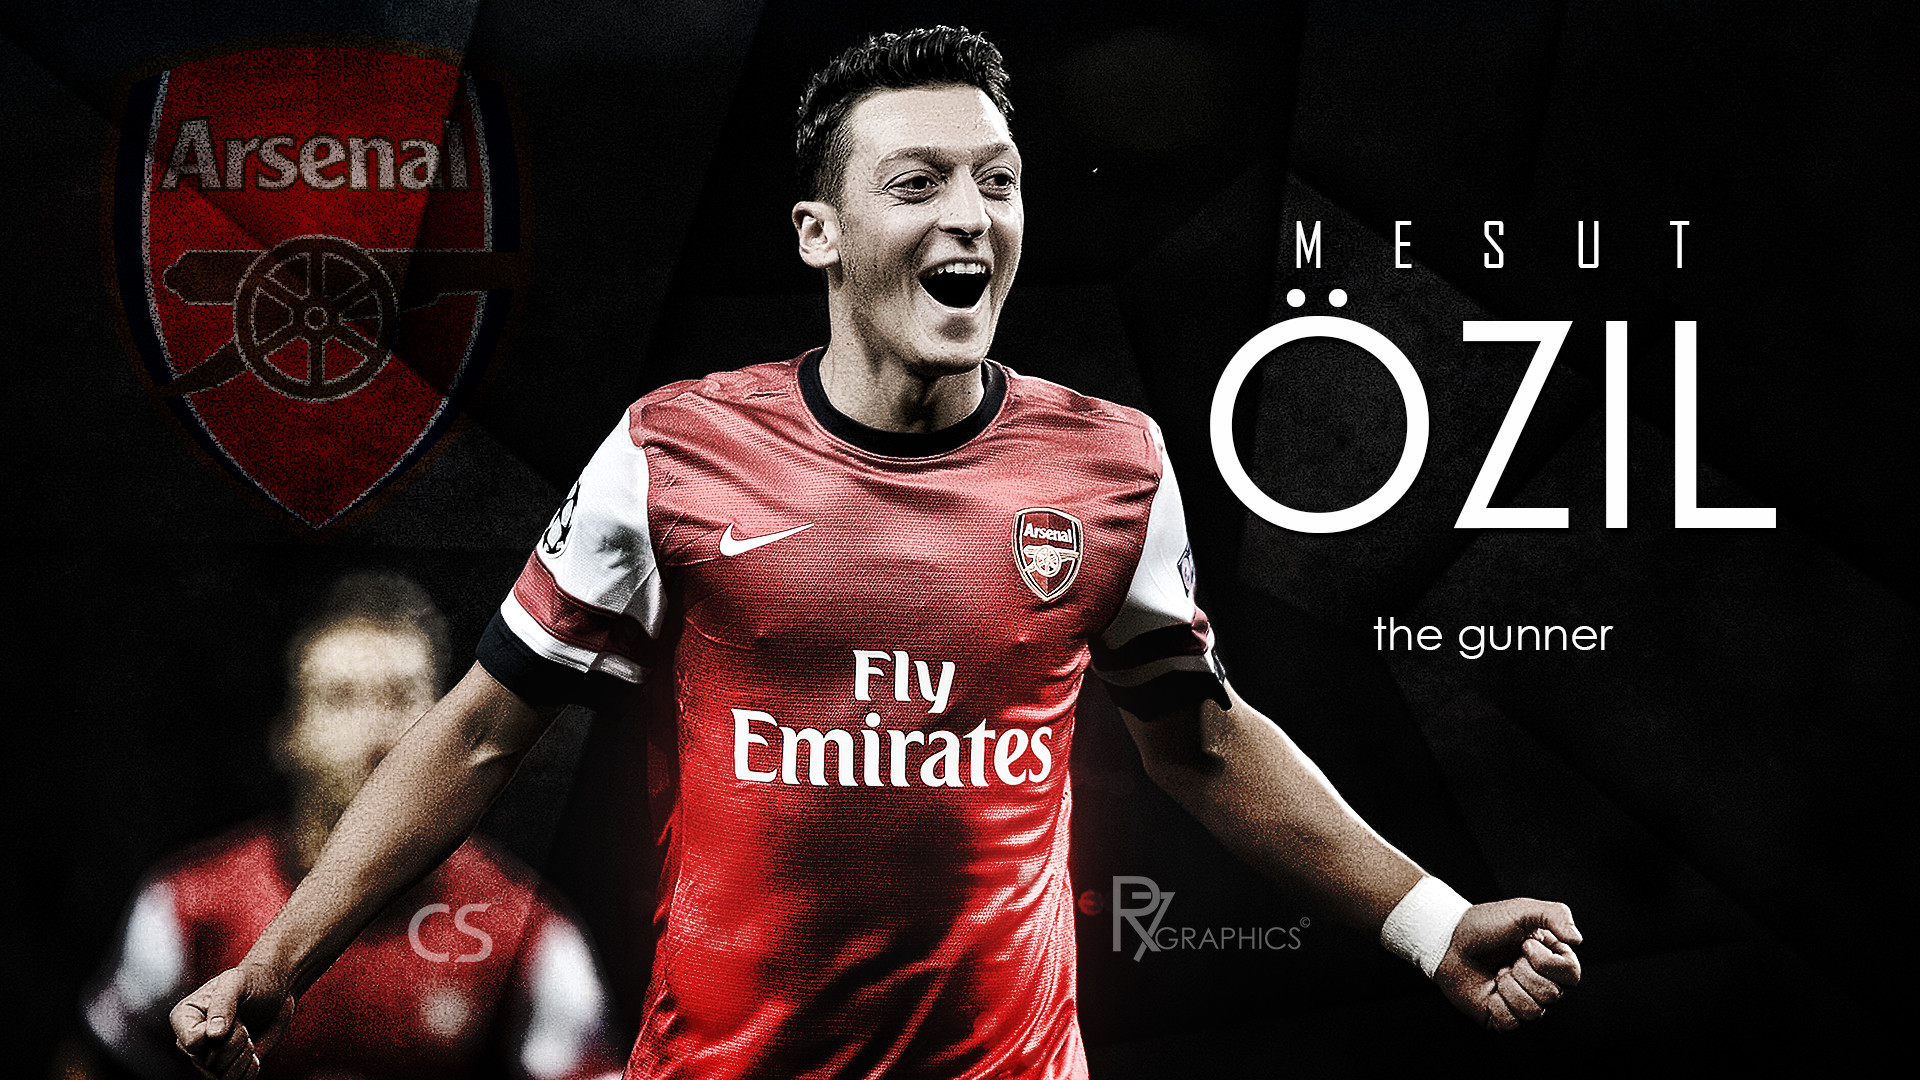 Life Story of Mesut Ozil: A Journey of Passion, Talent, and Legacy